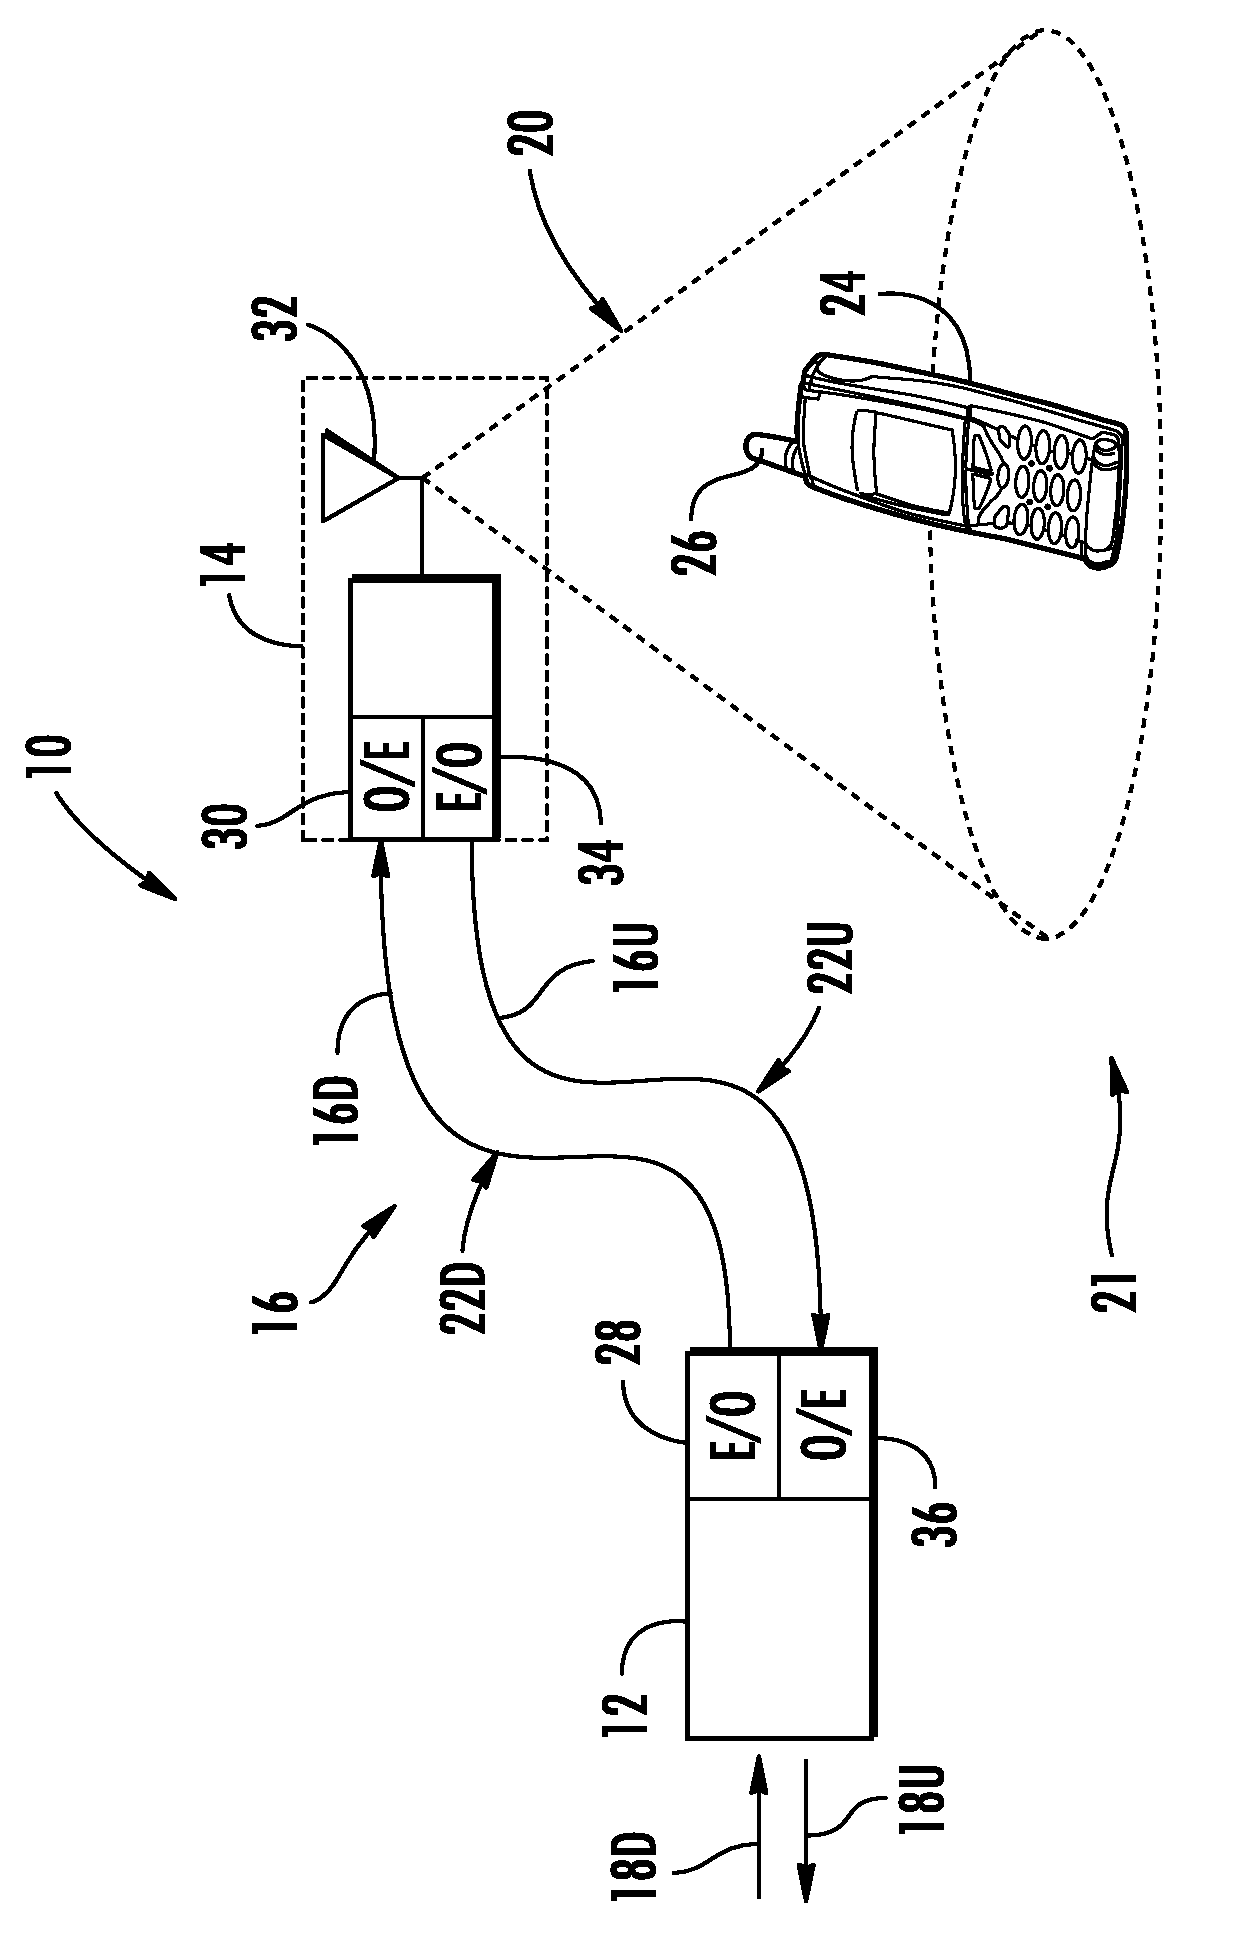 Power distribution module(s) capable of hot connection and/or disconnection for distributed antenna systems, and related power units, components, and methods